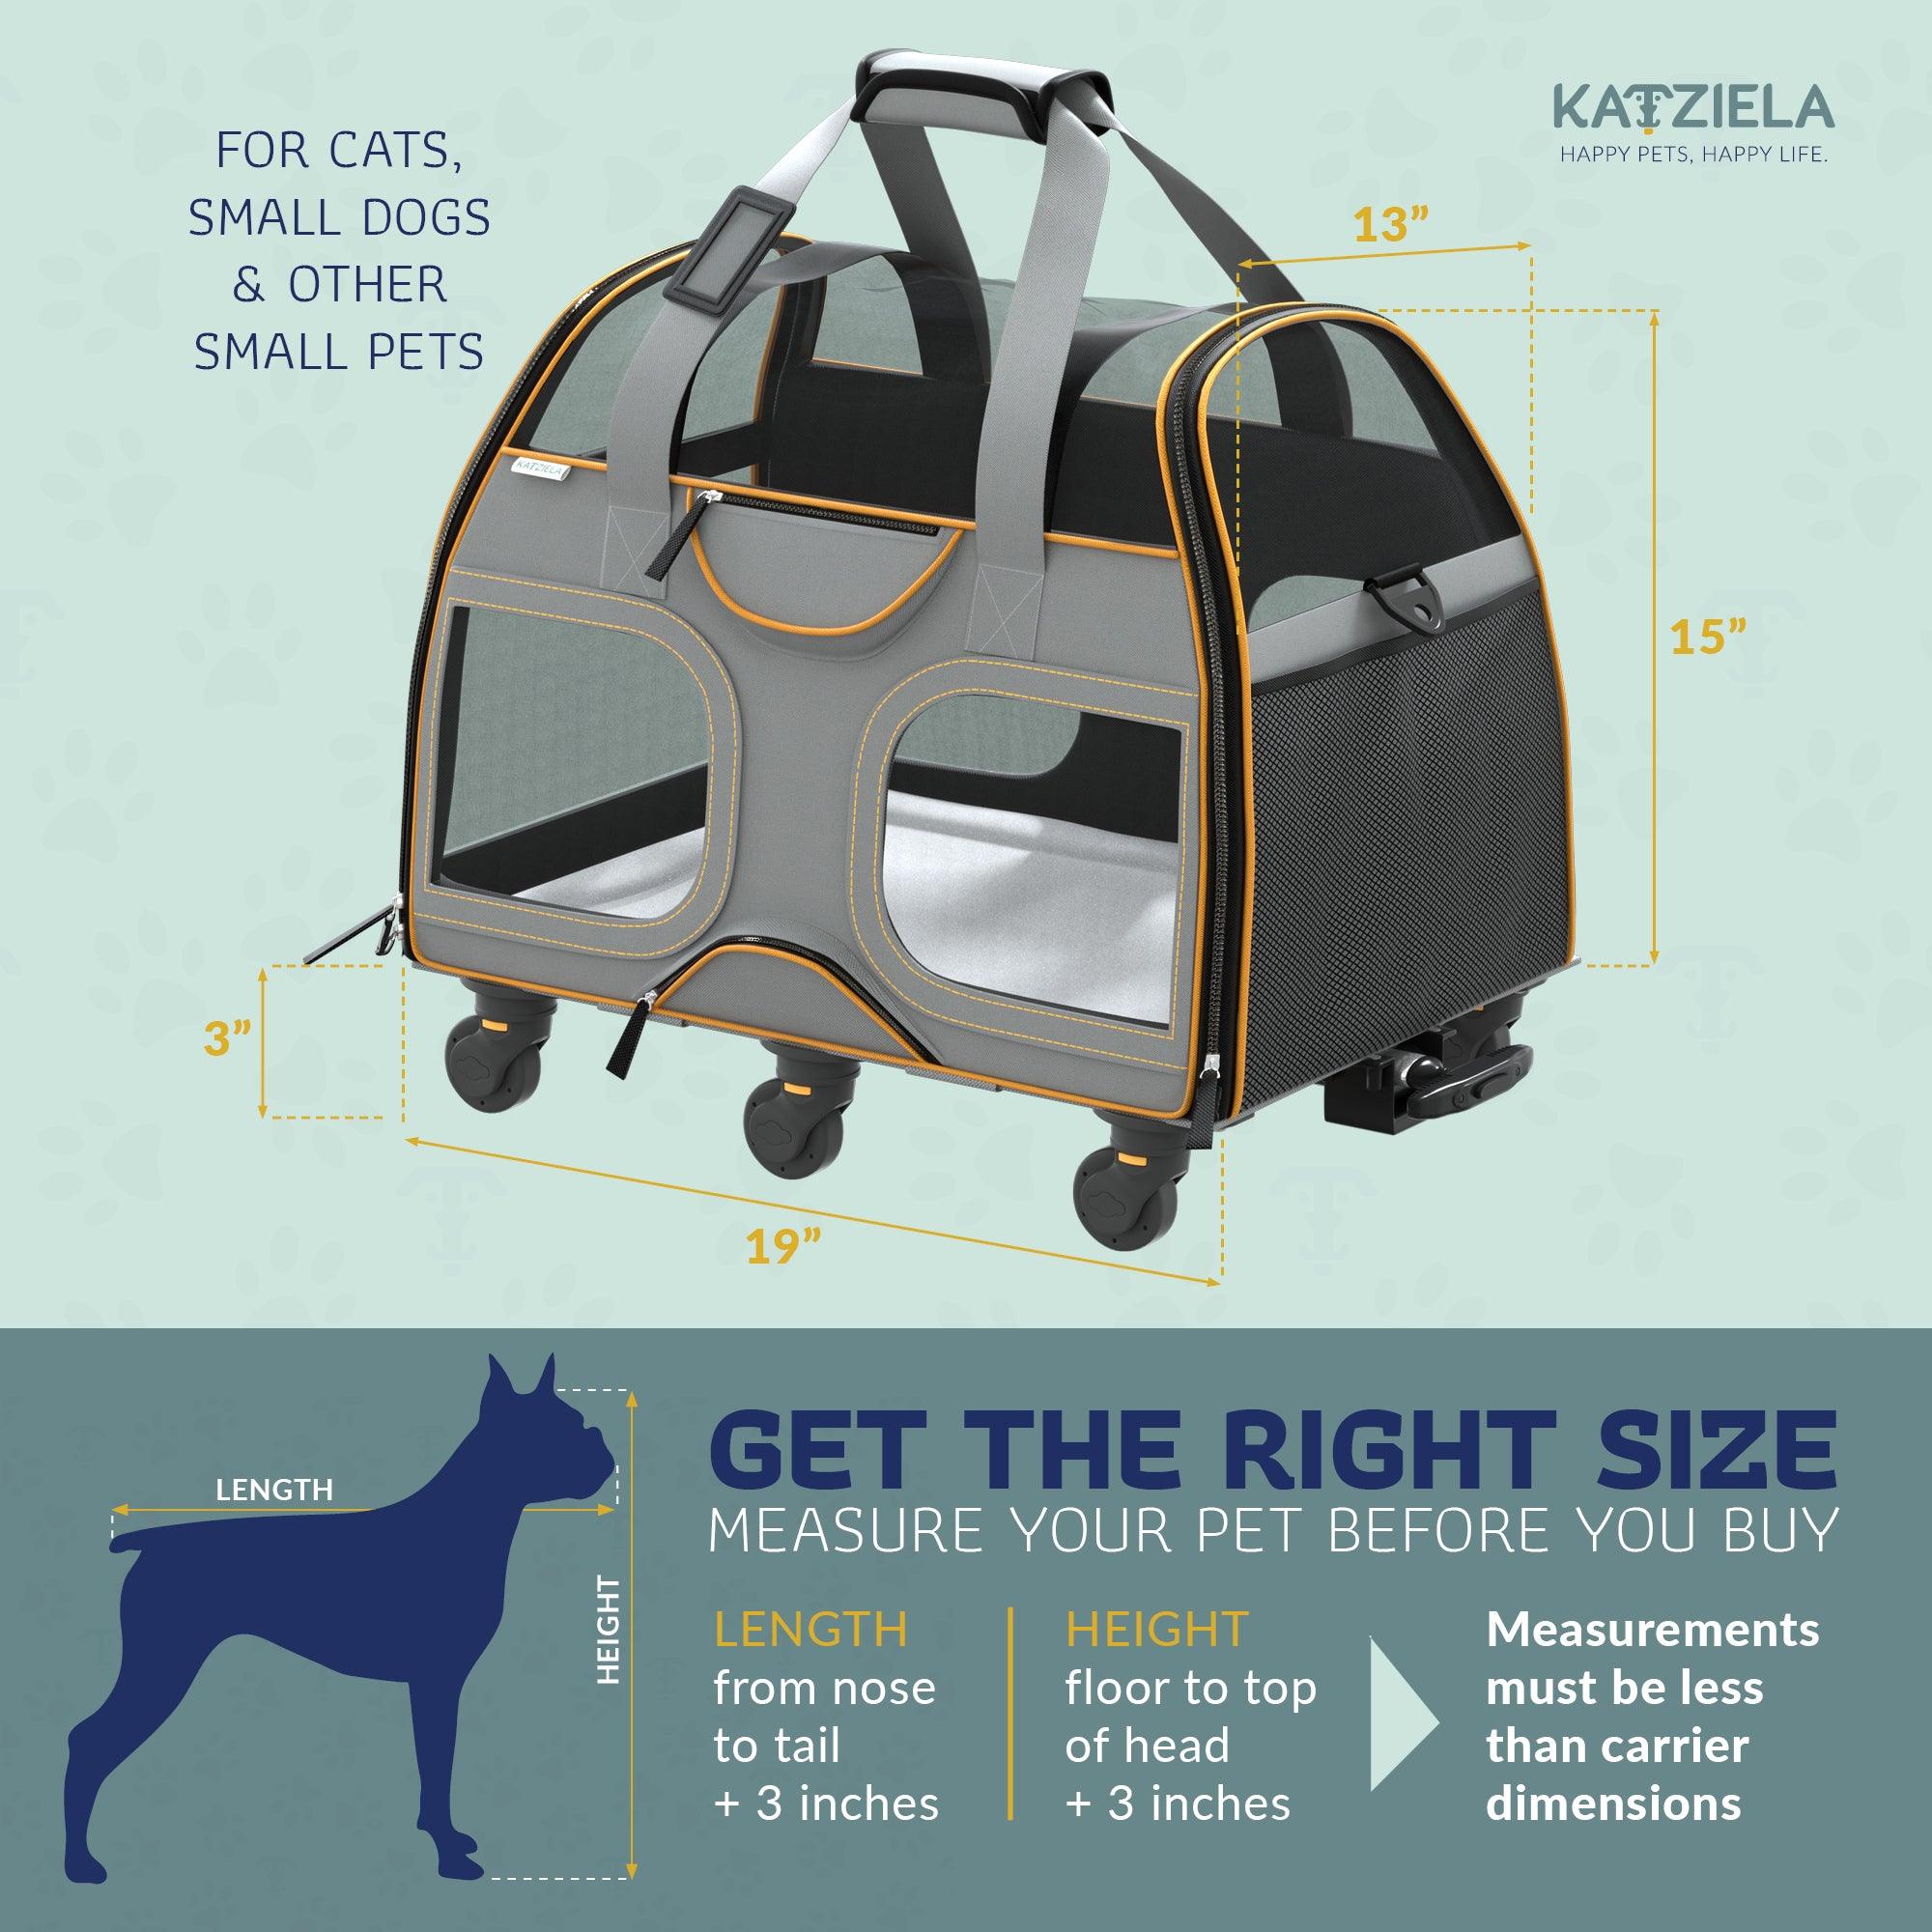 Katziela® Luxury Rider Pet Carrier with Removable Wheels and Telescopic Handle